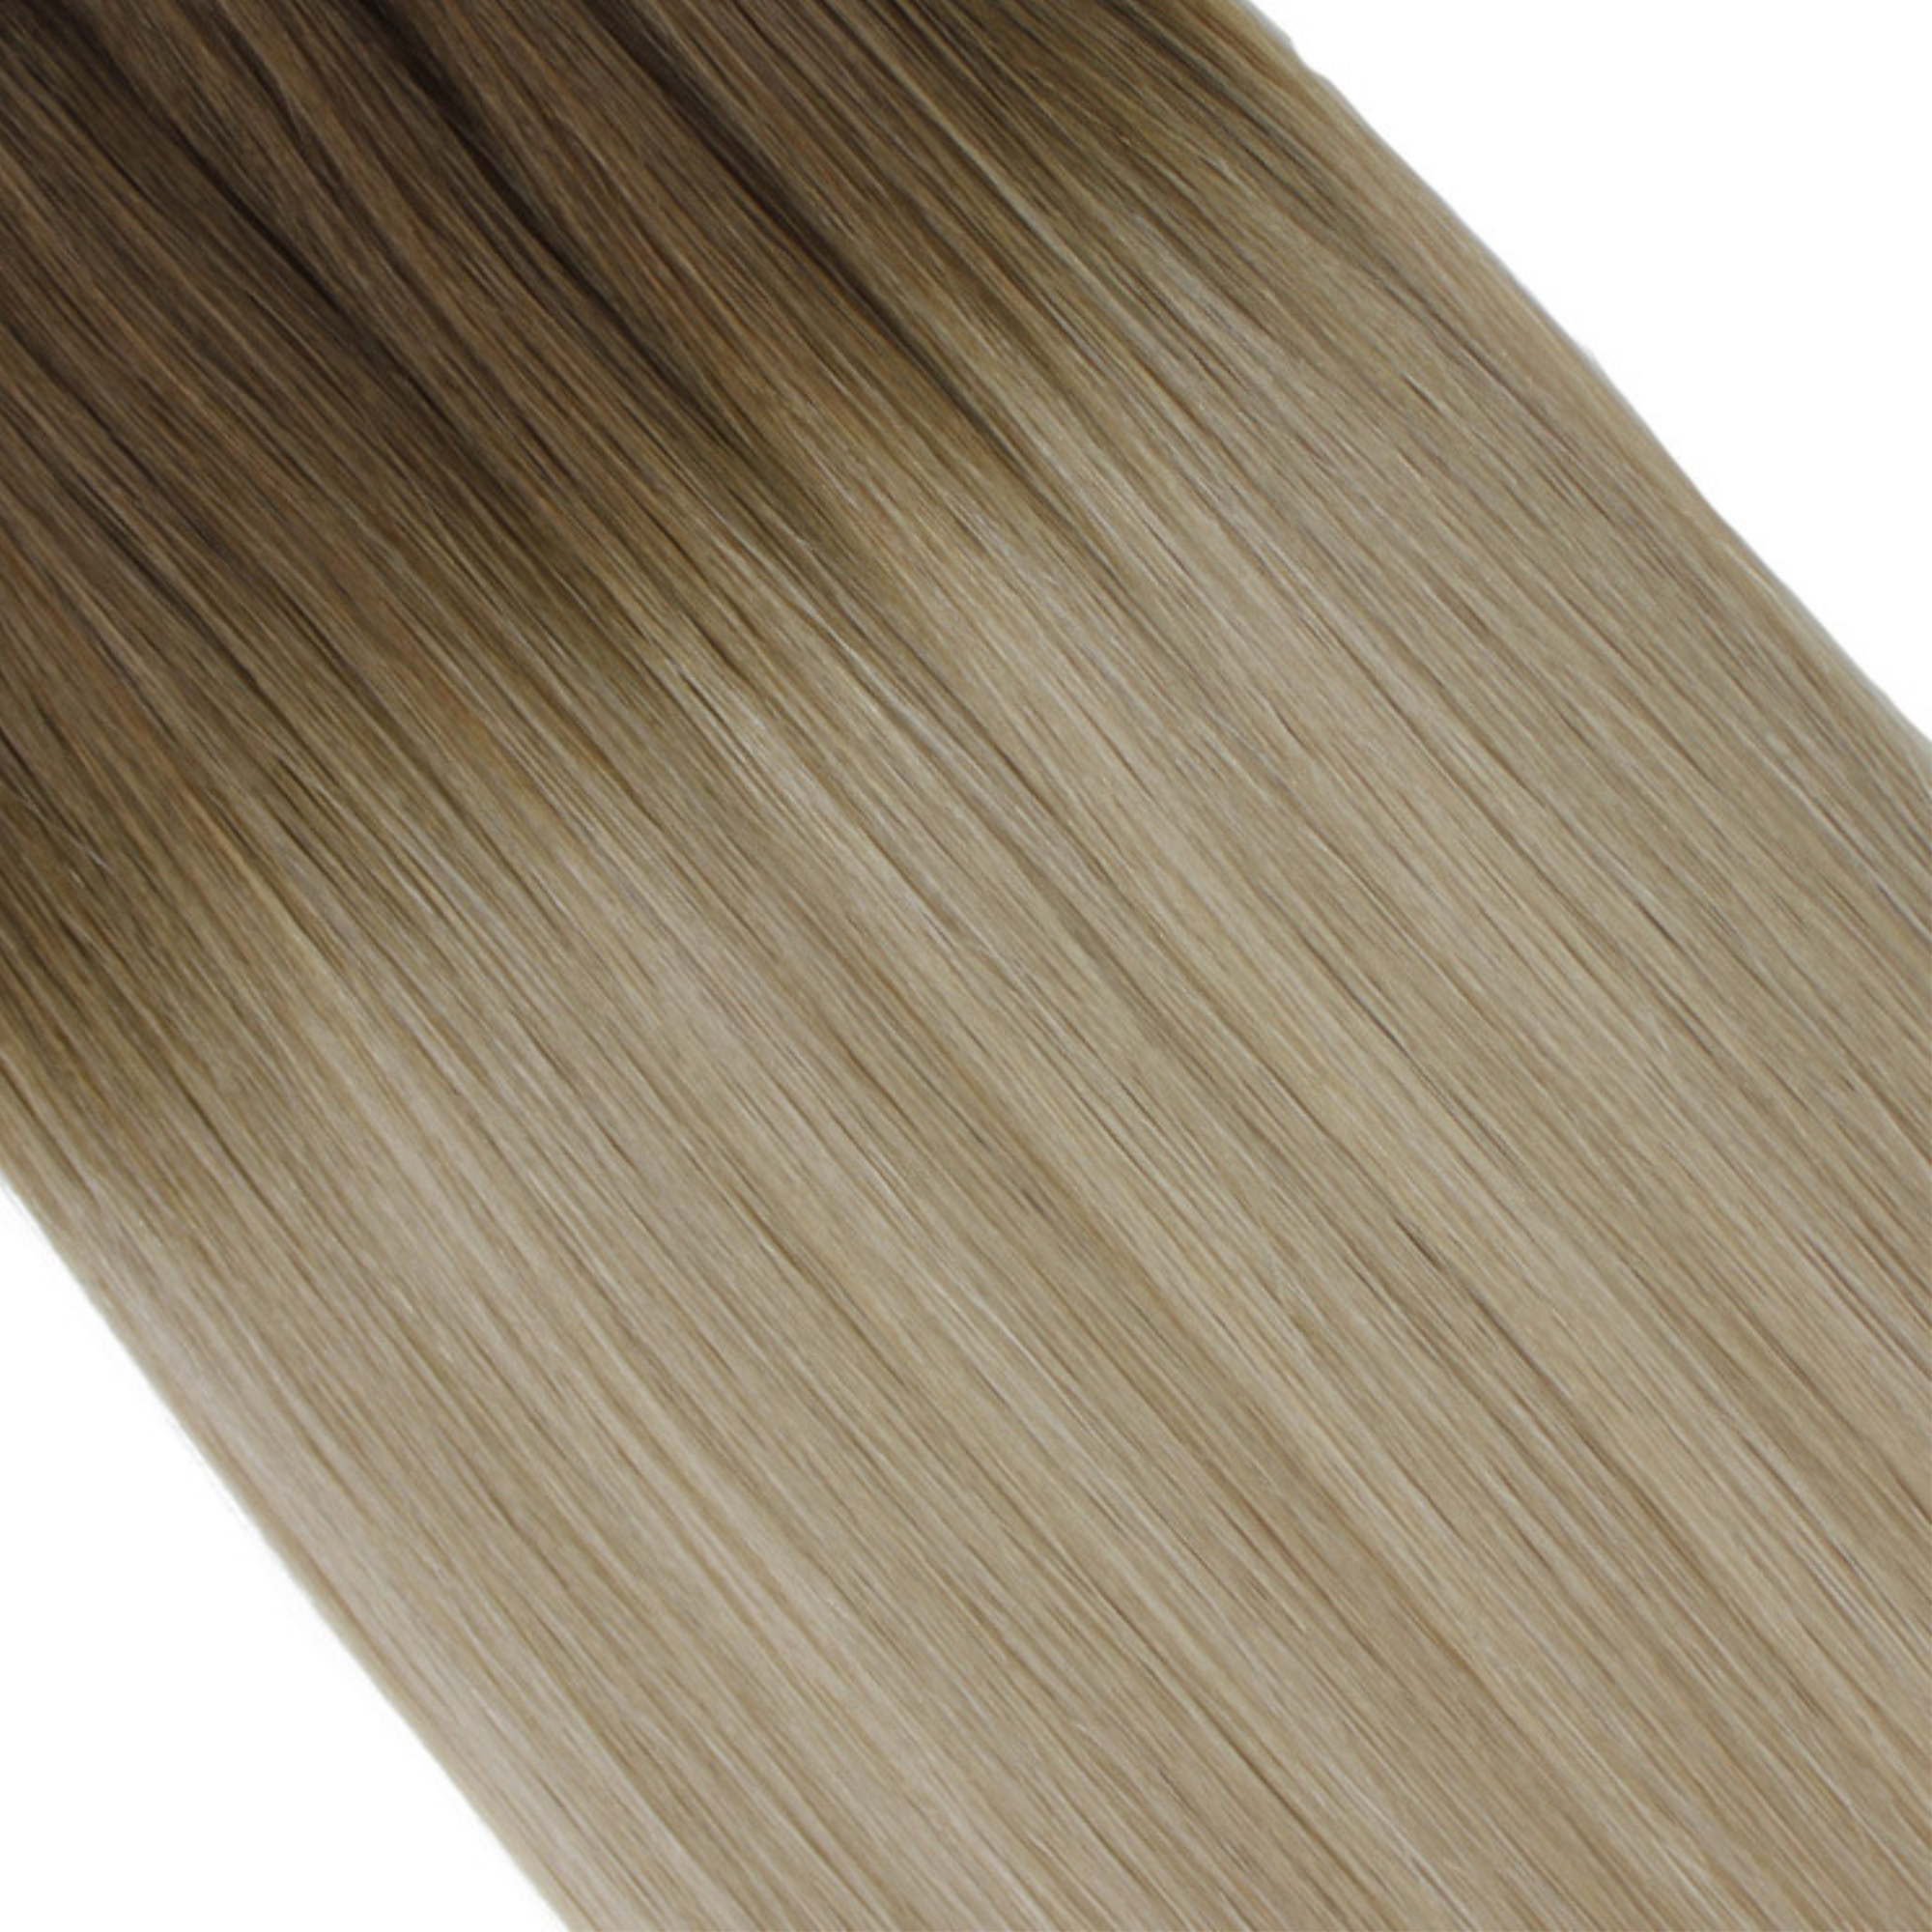 "hair rehab london 18" weft hair extensions shade swatch titled rooted baby blonde"